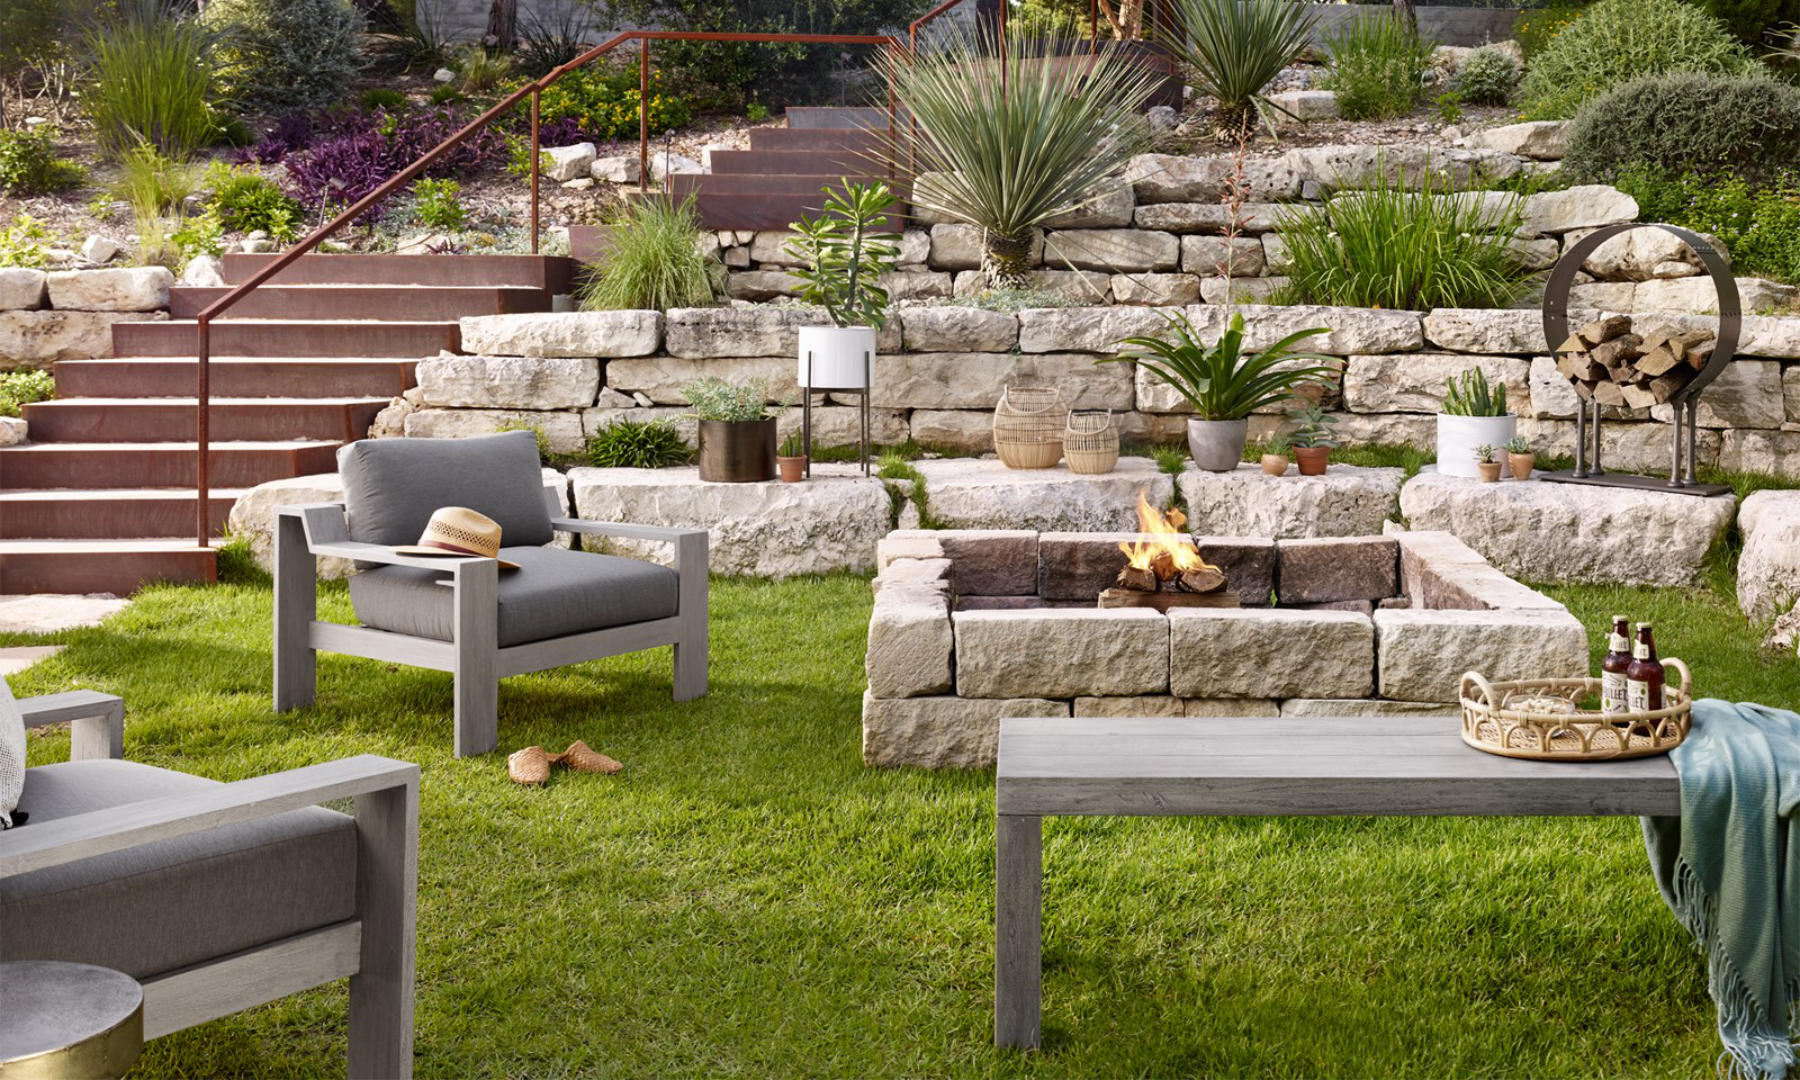 A stunning patio set up, with grey furniture, a fireplace, lots of pots and plants, and a stone wall on the back.